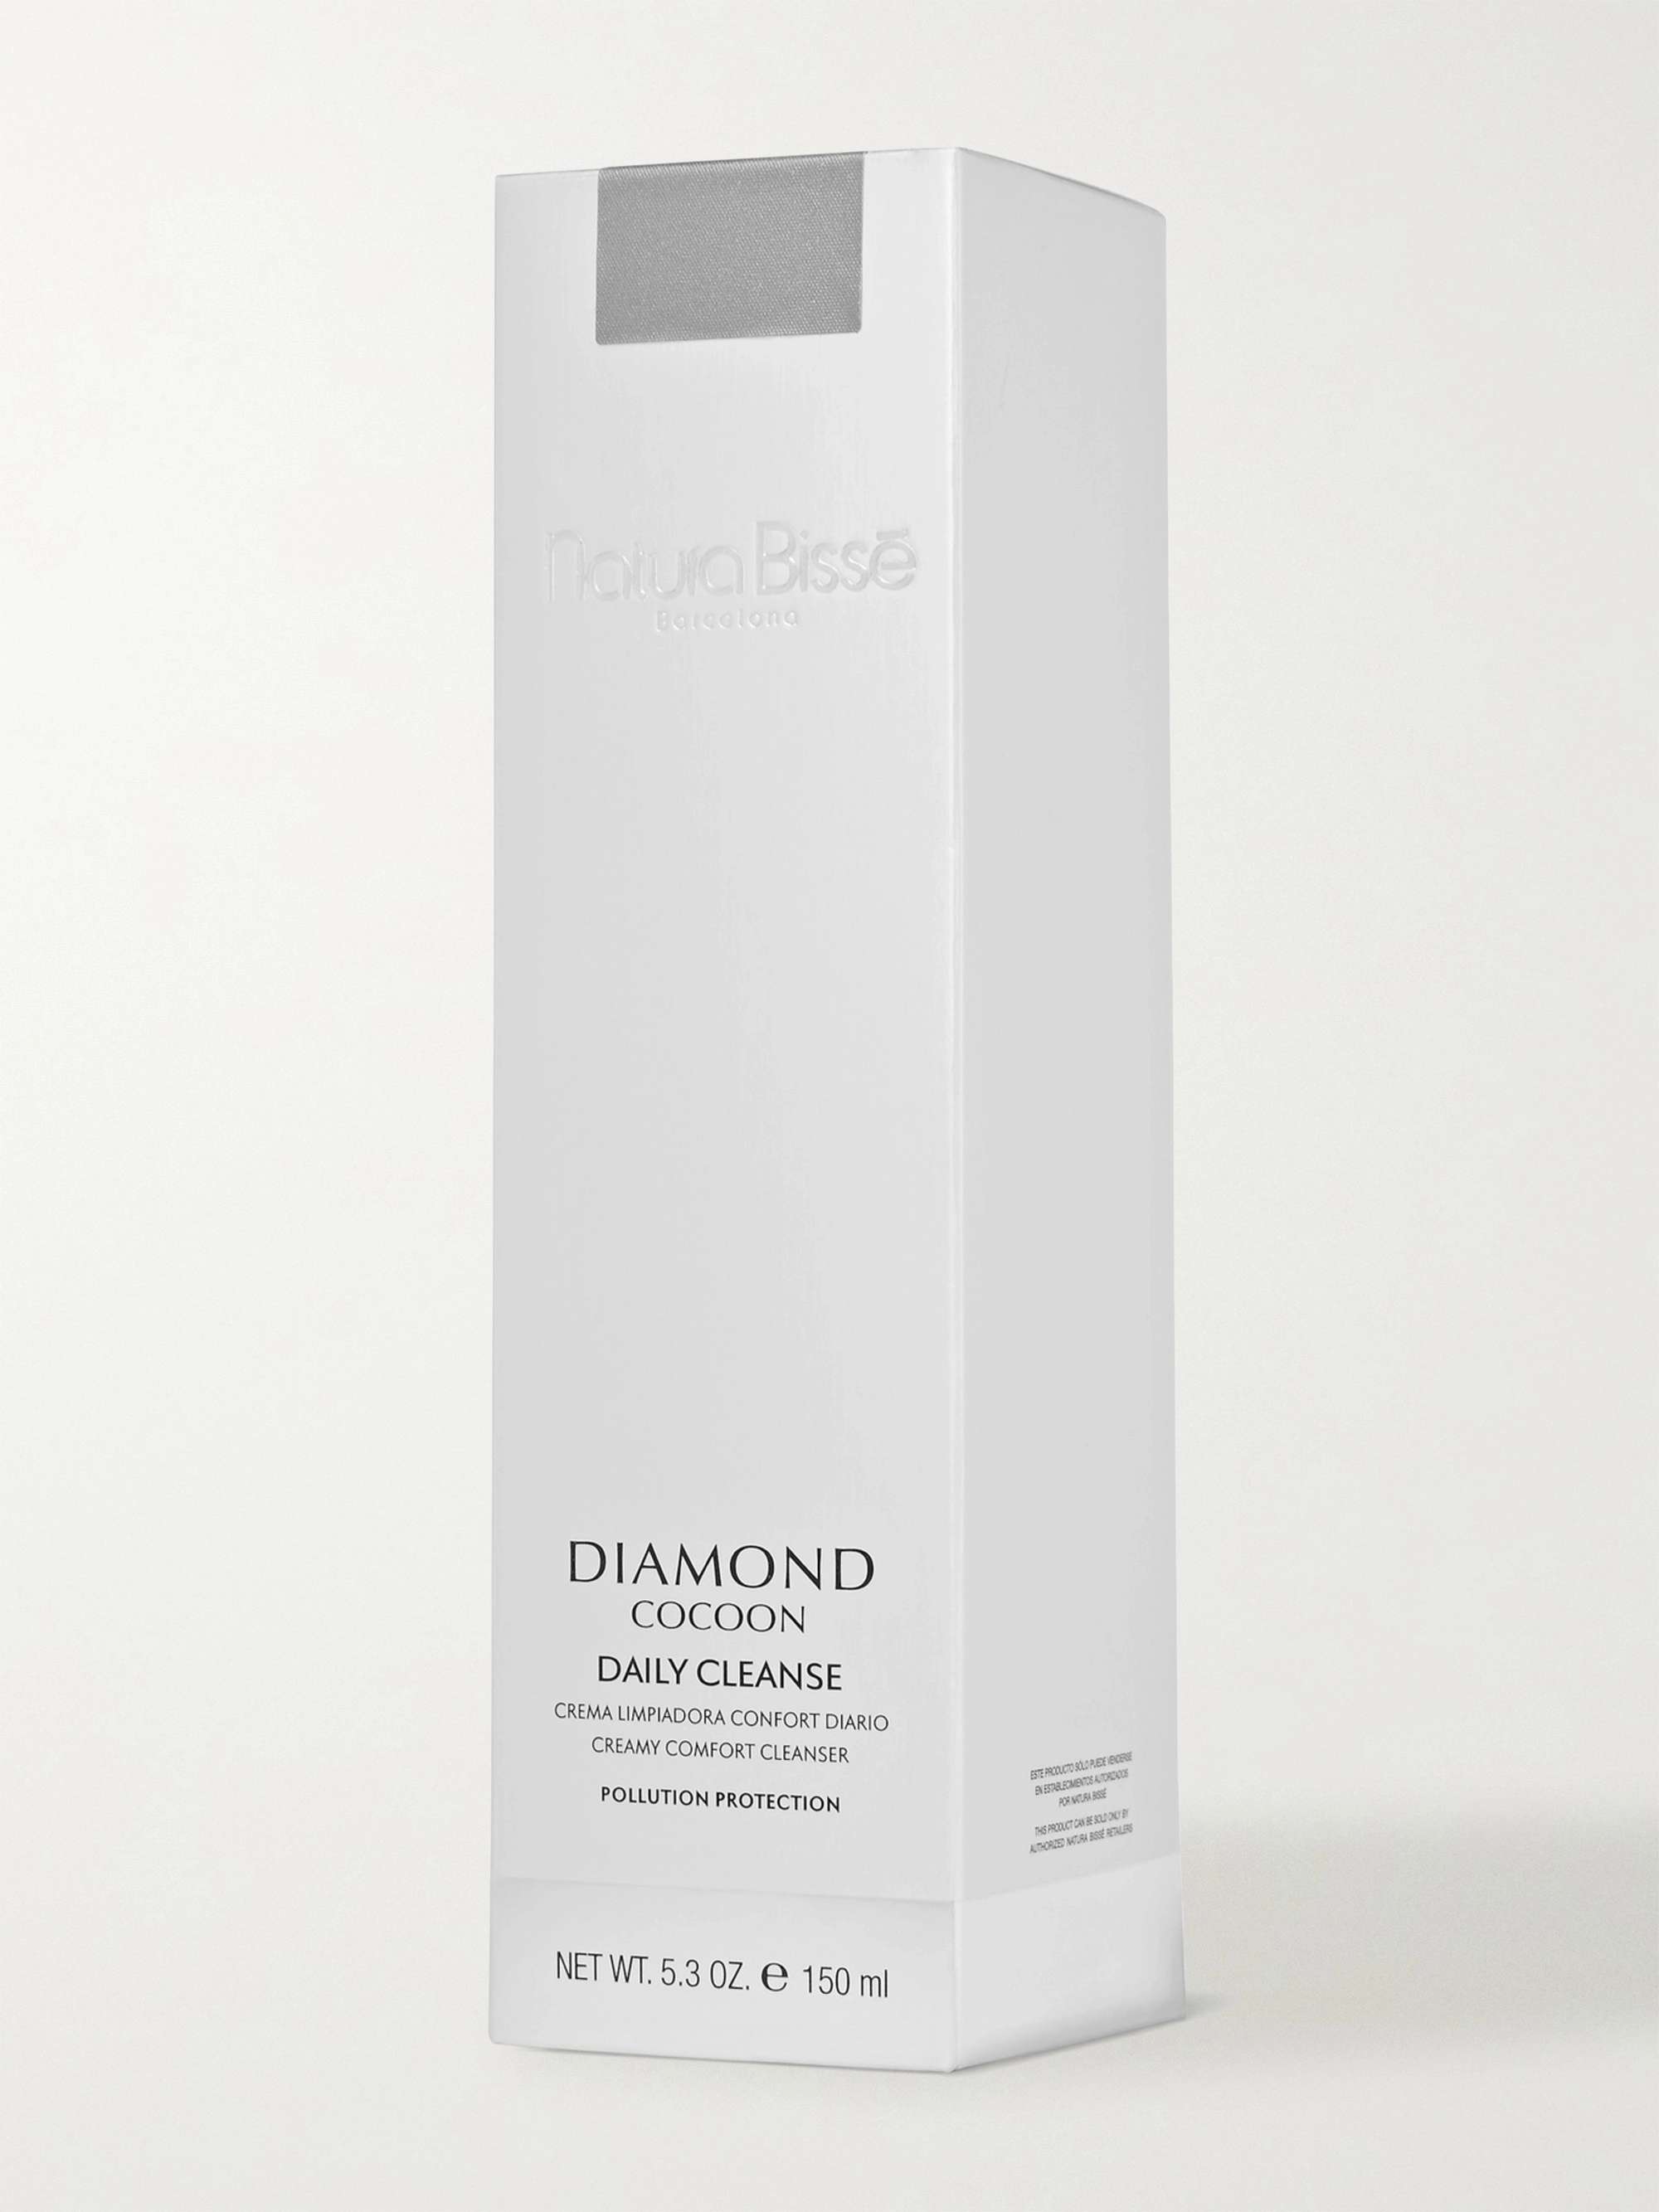 NATURA BISSÉ Diamond Cocoon Daily Cleanse, 150ml